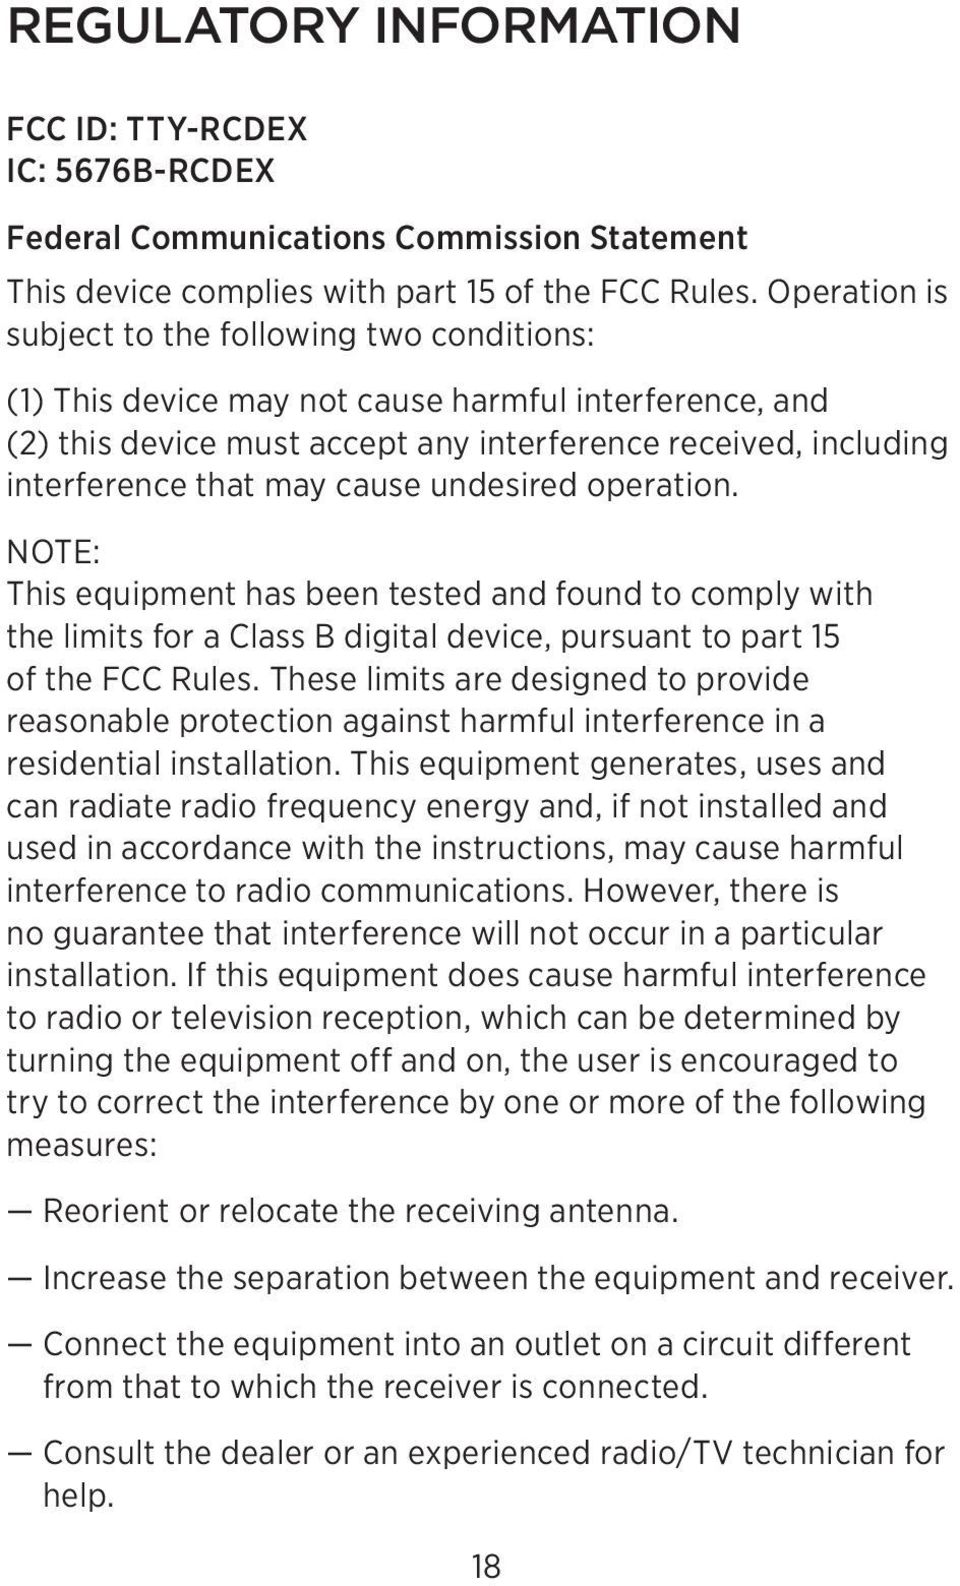 cause undesired operation. NOTE: This equipment has been tested and found to comply with the limits for a Class B digital device, pursuant to part 15 of the FCC Rules.